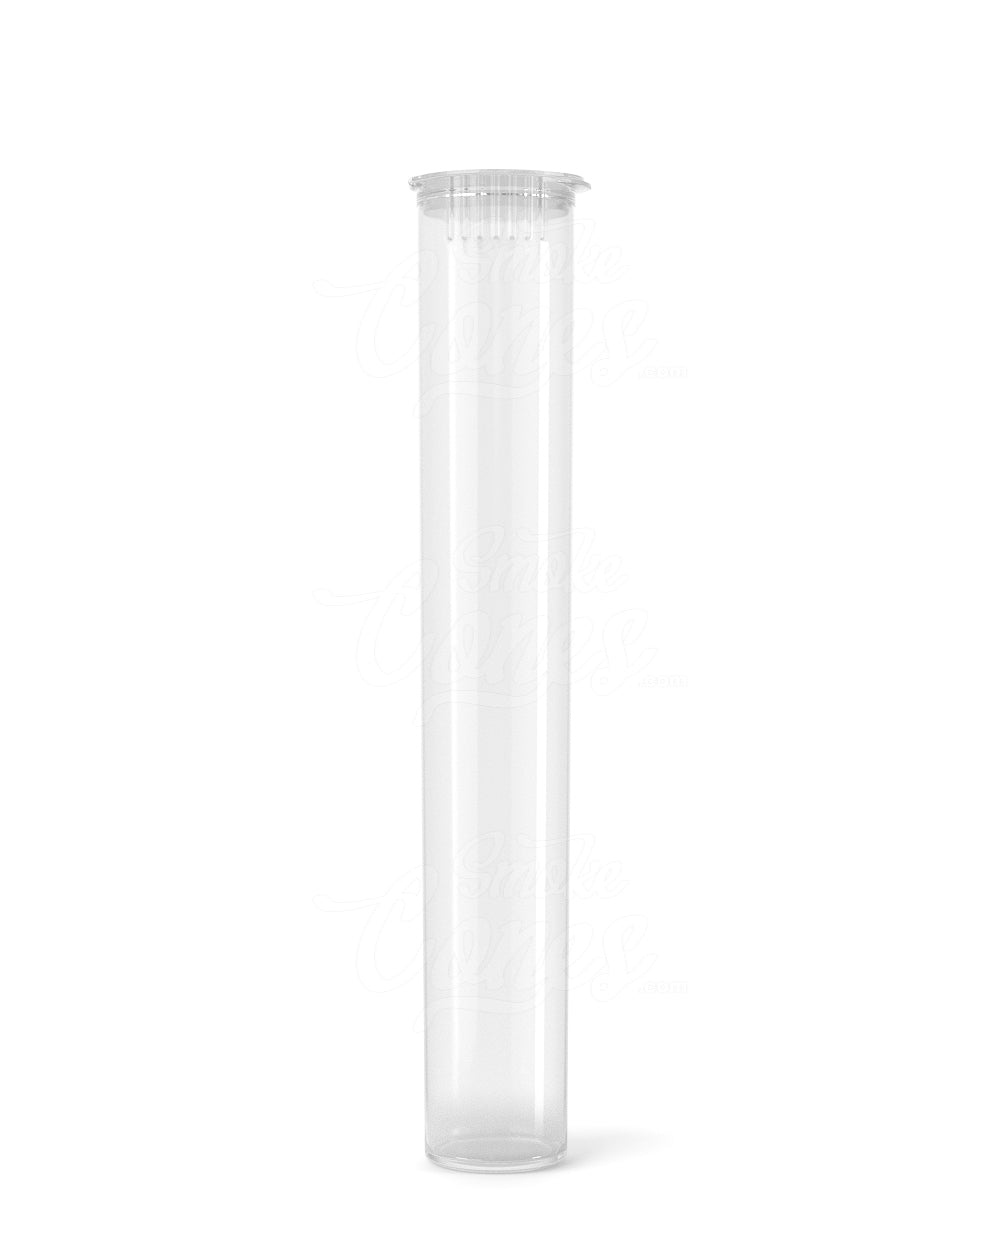 116mm Clear Opaque Child Resistant Biodegradable Pop Top Plastic Pre-Roll Tubes 1000/Box - 4